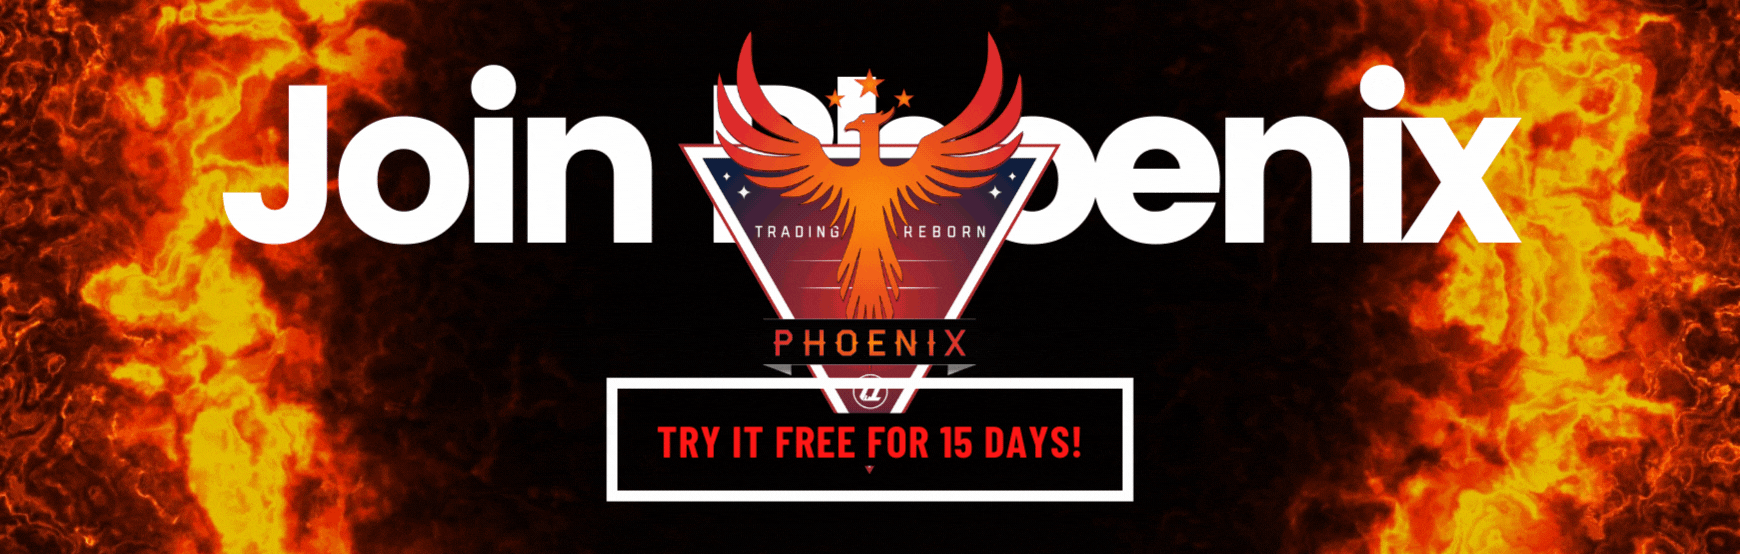 Join Phoenix Trading Labs. Click on the image to try it FREE for 15 days!